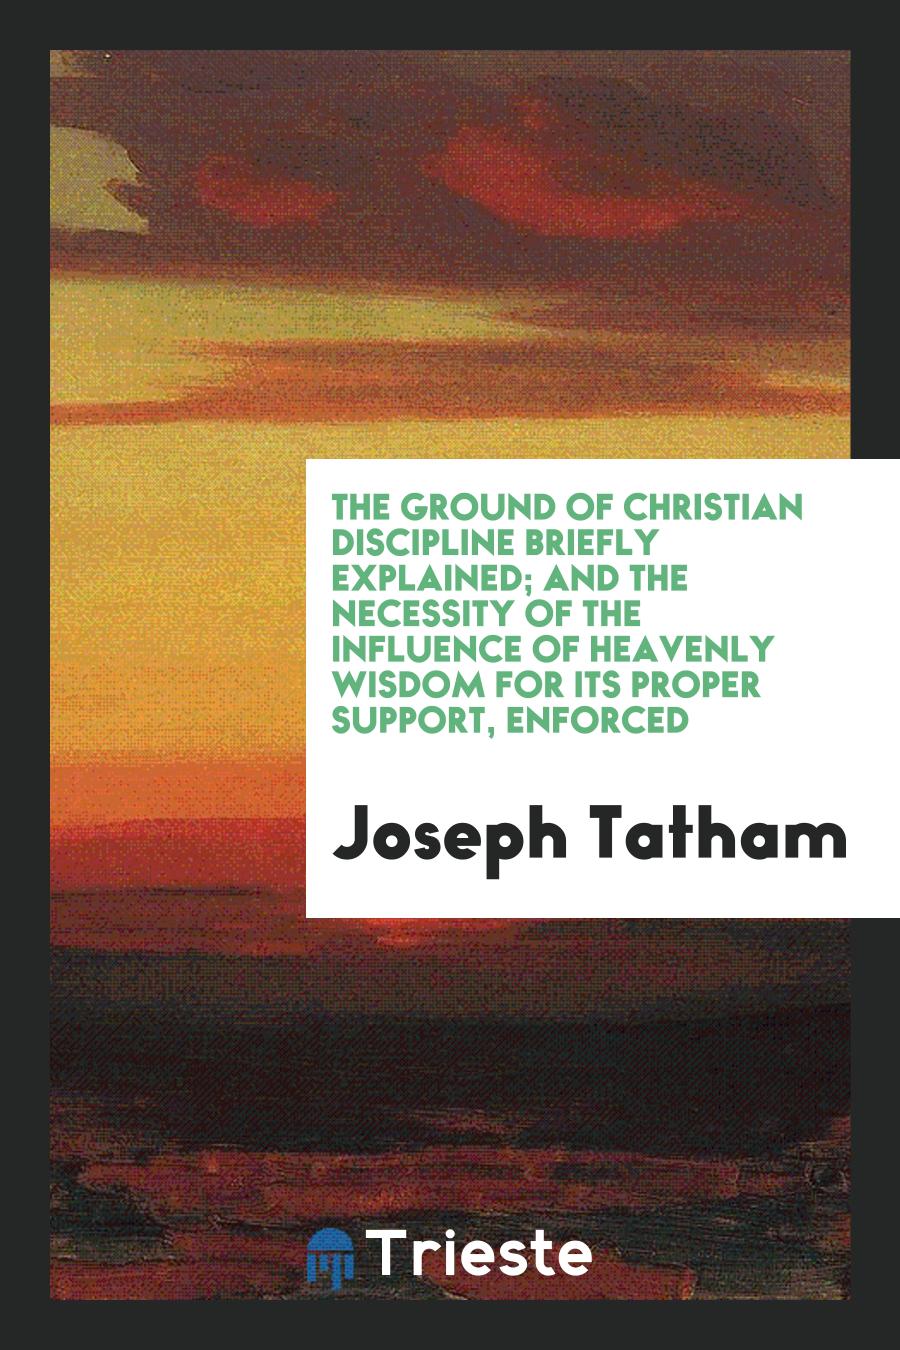 The Ground of Christian Discipline Briefly Explained; and the Necessity of the Influence of heavenly wisdom for its proper support, enforced